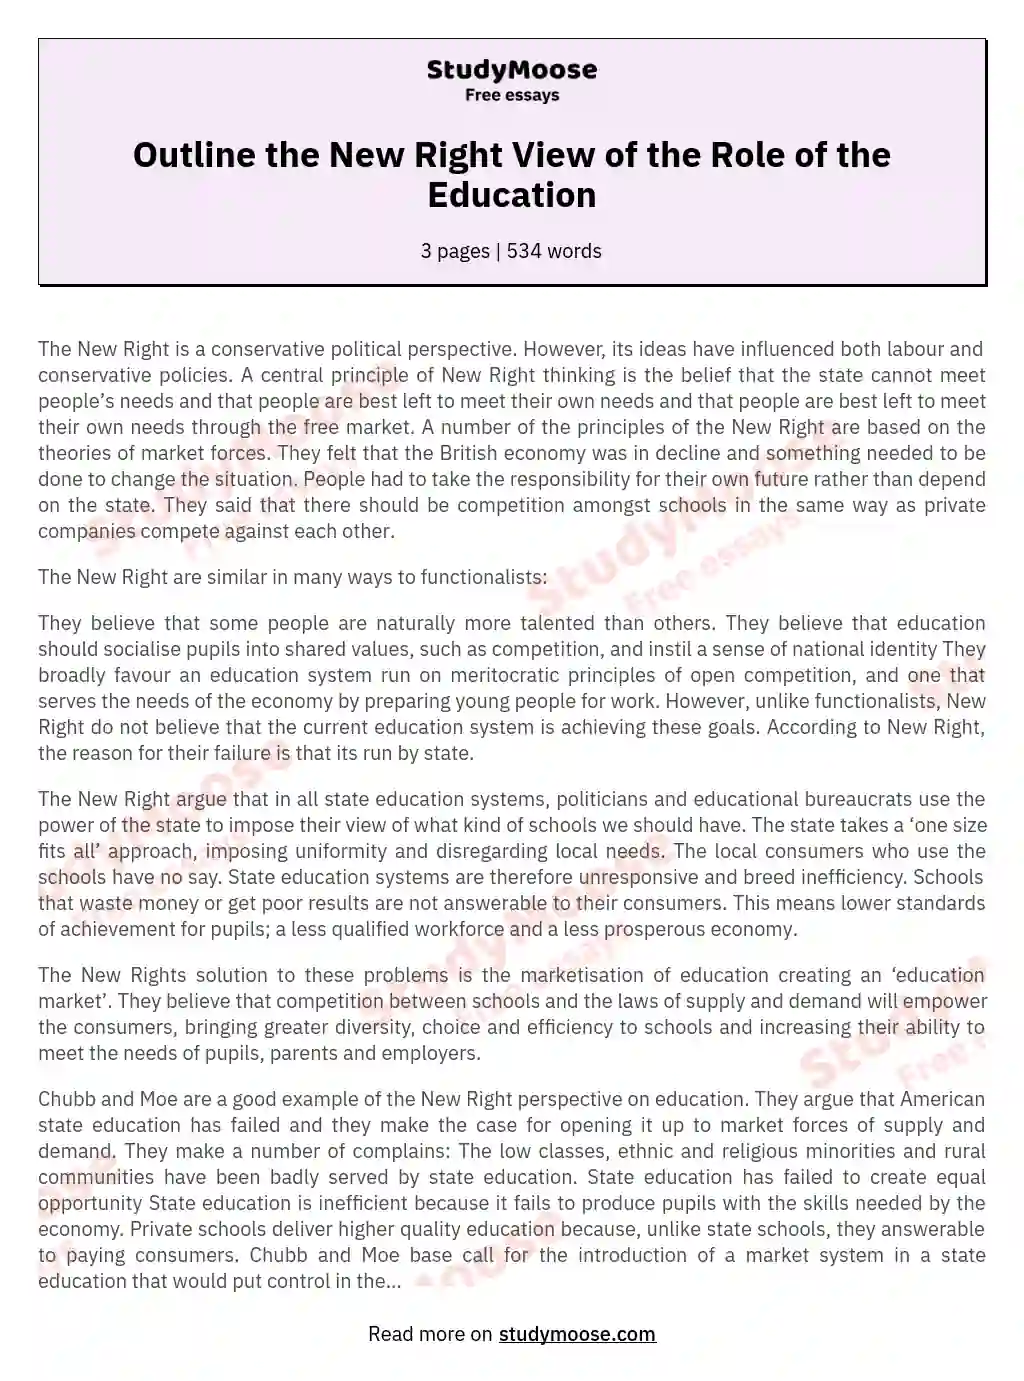 Outline the New Right View of the Role of the Education essay